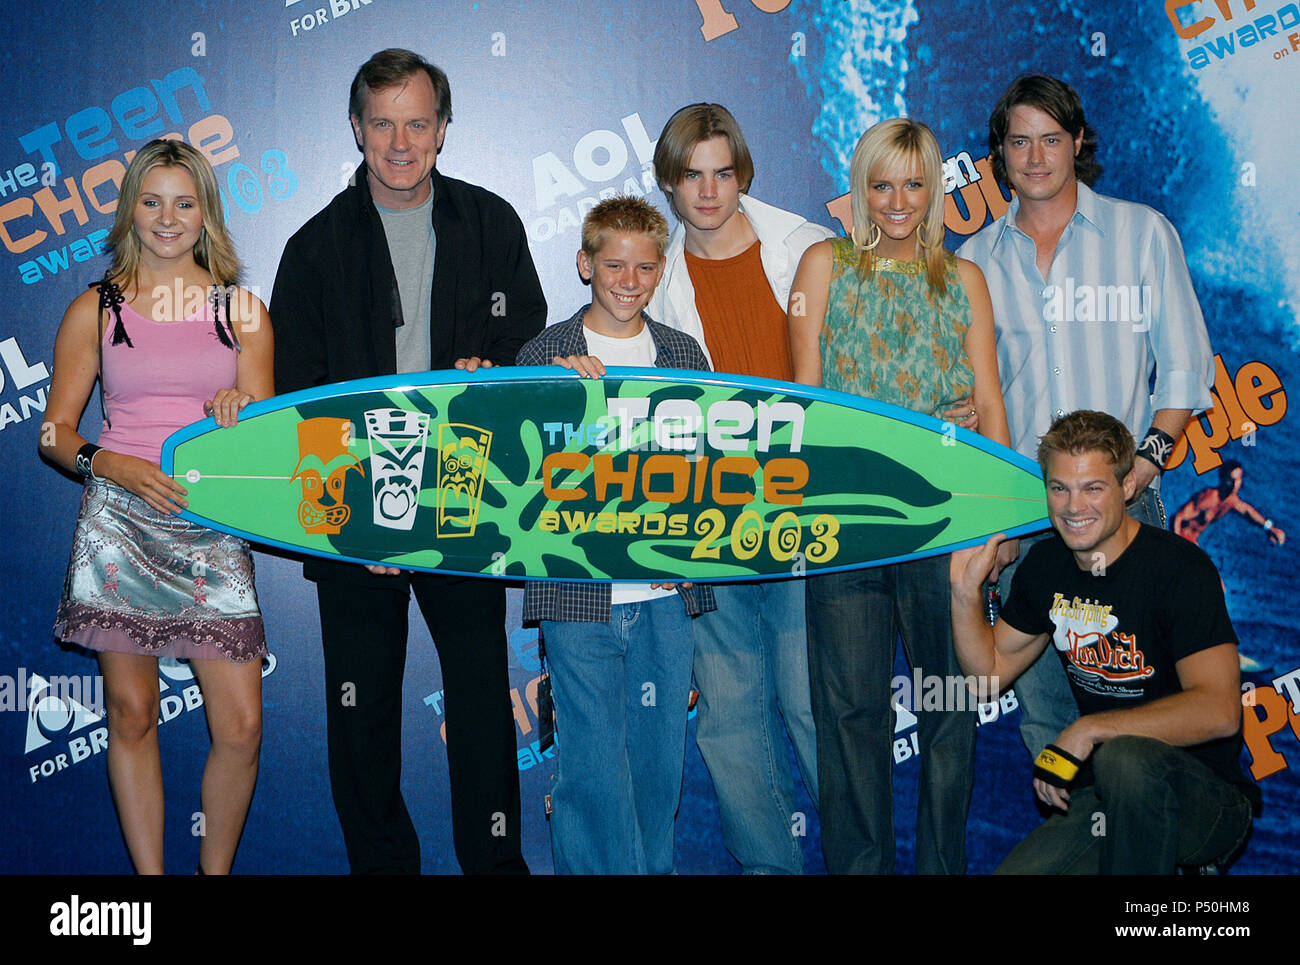 7th Heaven cast backstage at the ' Teen Choice Awards 2003 ' at the Universal Amphitheatre in Los Angeles. August 2, 2003.          -            7thHeaven085.jpg7thHeaven085  Event in Hollywood Life - California, Red Carpet Event, USA, Film Industry, Celebrities, Photography, Bestof, Arts Culture and Entertainment, Topix Celebrities fashion, Best of, Hollywood Life, Event in Hollywood Life - California,  backstage trophy, Awards show, movie celebrities, TV celebrities, Music celebrities, Topix, Bestof, Arts Culture and Entertainment, Photography,    inquiry tsuni@Gamma-USA.com , Credit Tsuni / Stock Photo